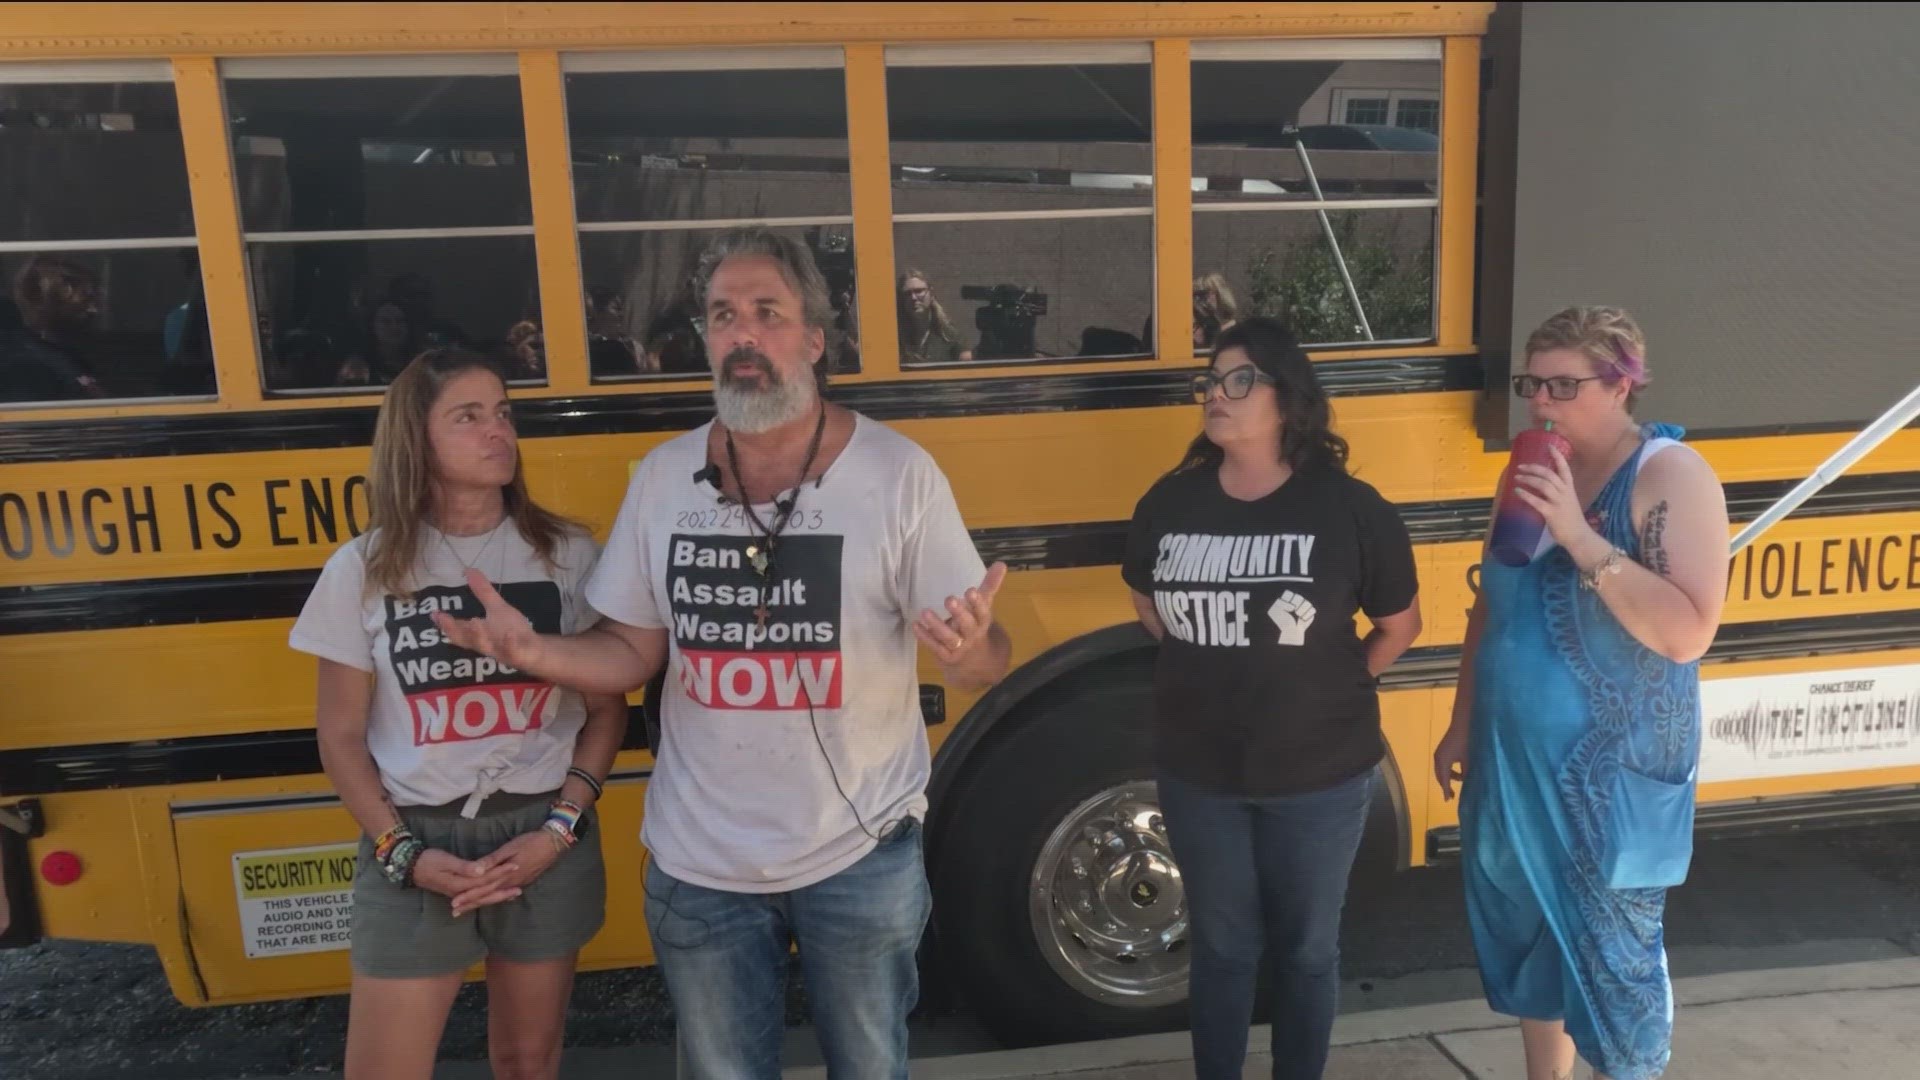 On Monday, the family of school shooting victims went to the Texas Capitol to raise awareness about gun violence. It's one stop on their bus tour.